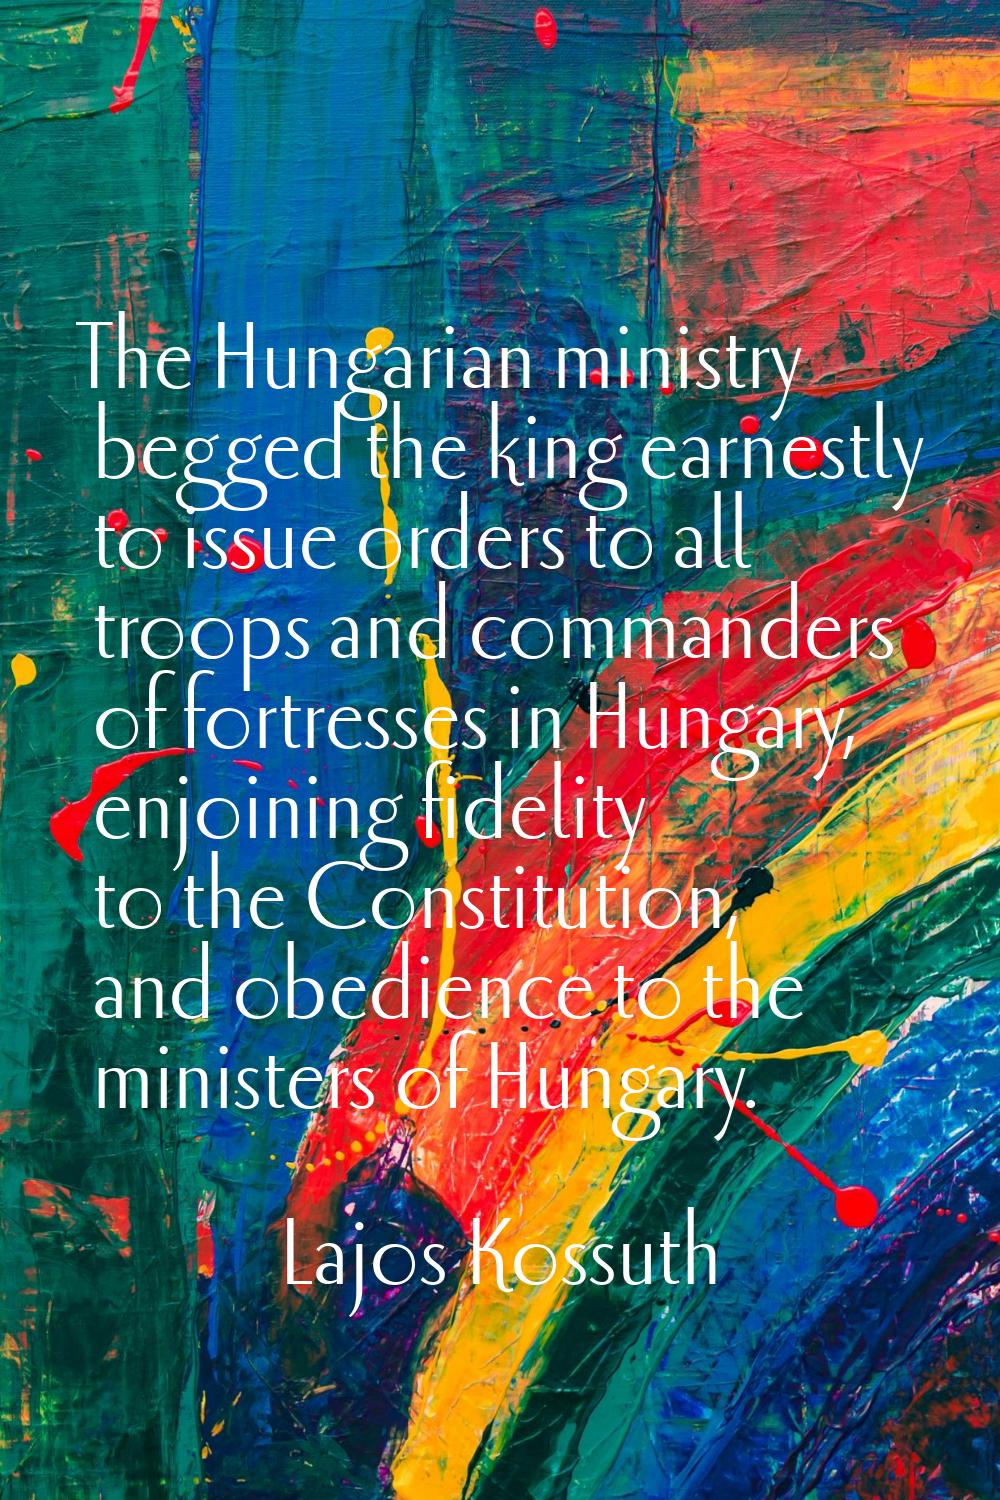 The Hungarian ministry begged the king earnestly to issue orders to all troops and commanders of fo